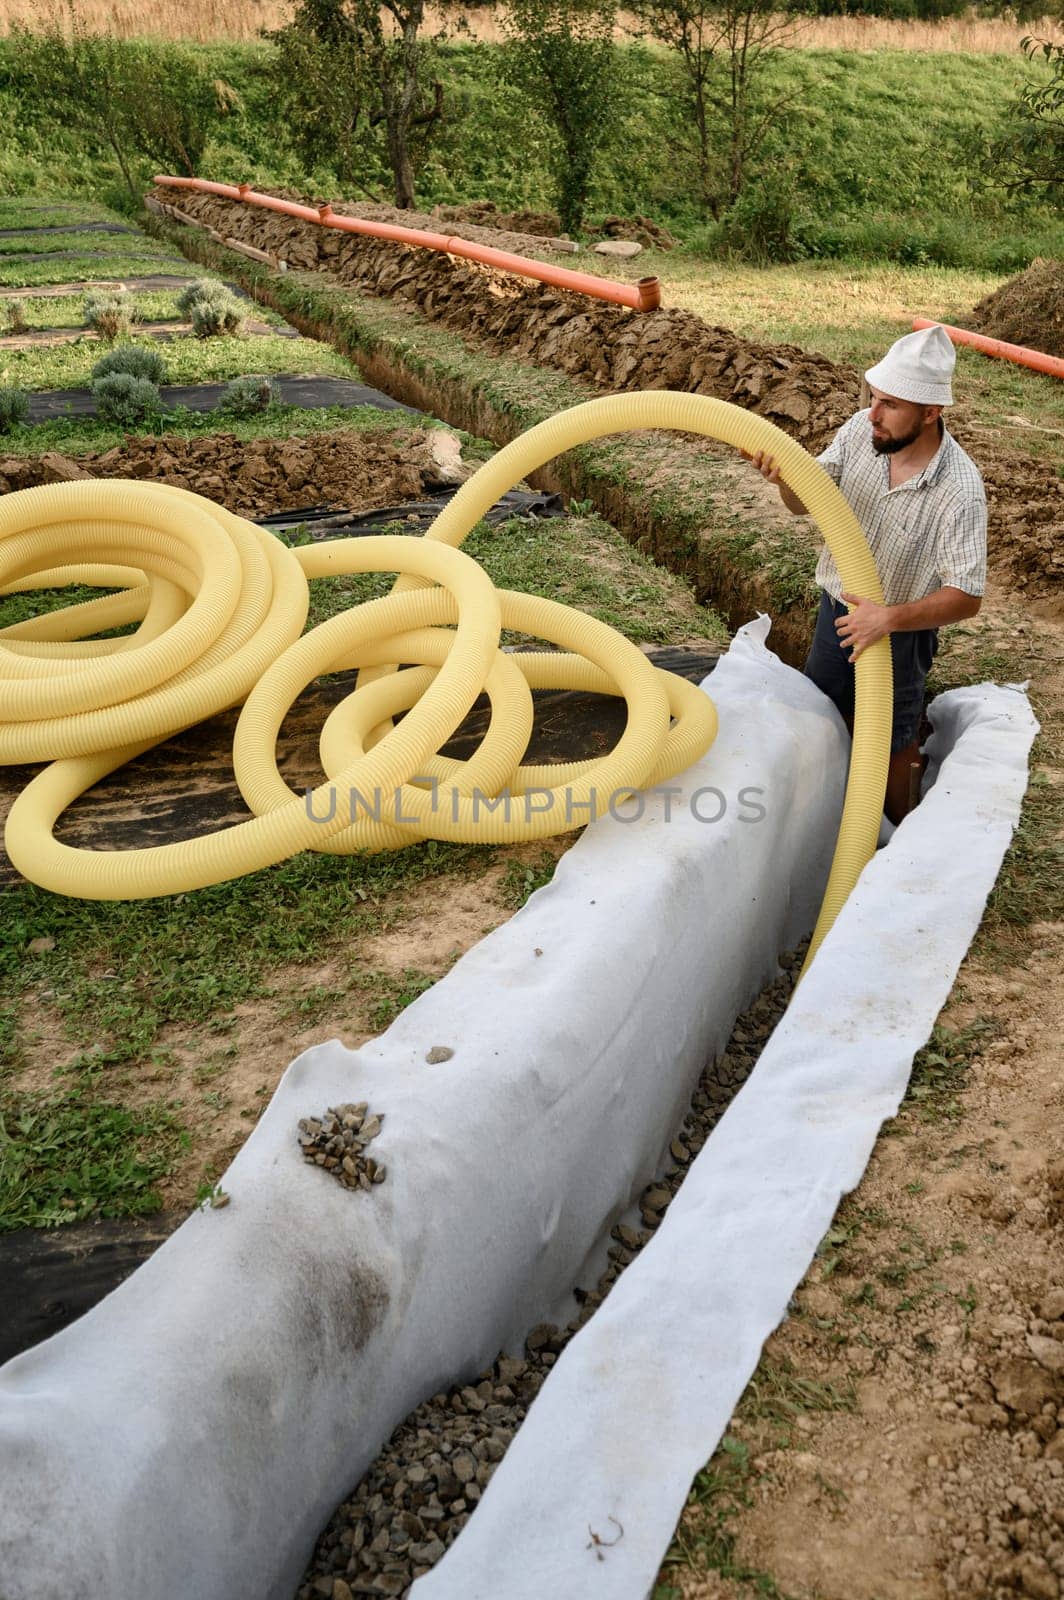 A worker carries a yellow perforated drainage pipe. Groundwater drainage works in the field by Niko_Cingaryuk